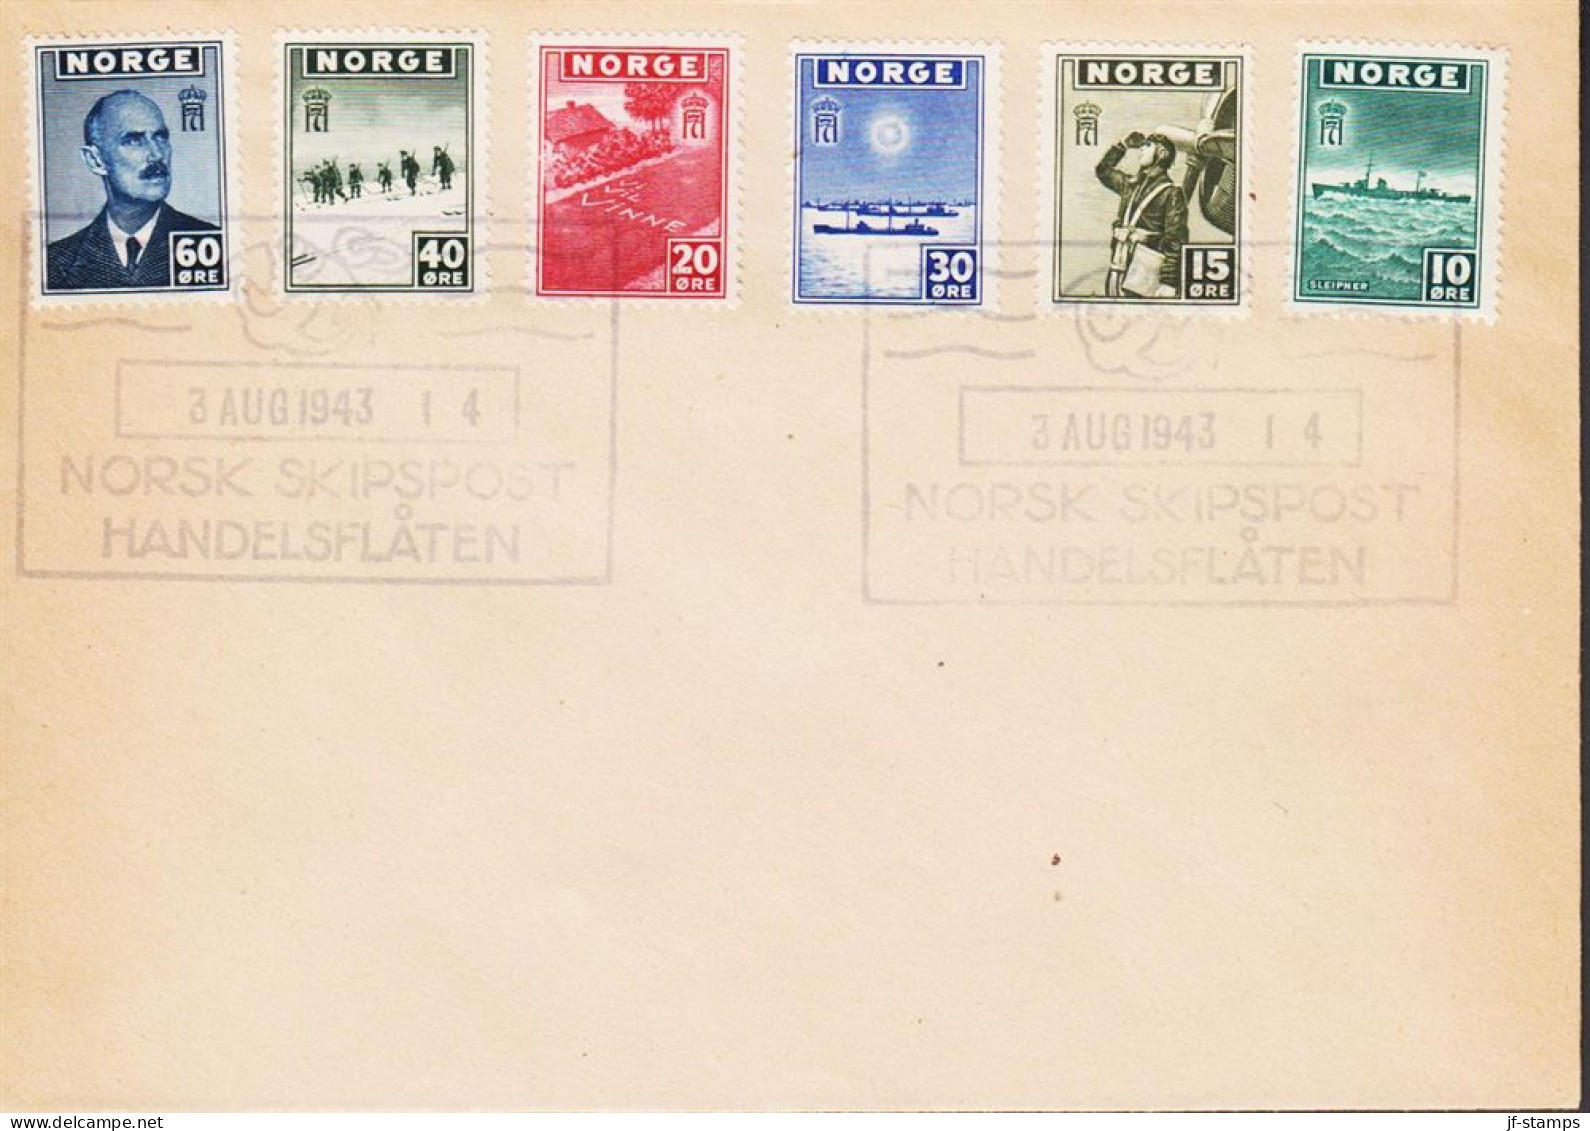 1943. NORGE. Fine Envelope With 10, 15, 20, 30 40 And 60 ØRE London Issue Cancelled With ... (Michel 278-283) - JF545675 - Briefe U. Dokumente